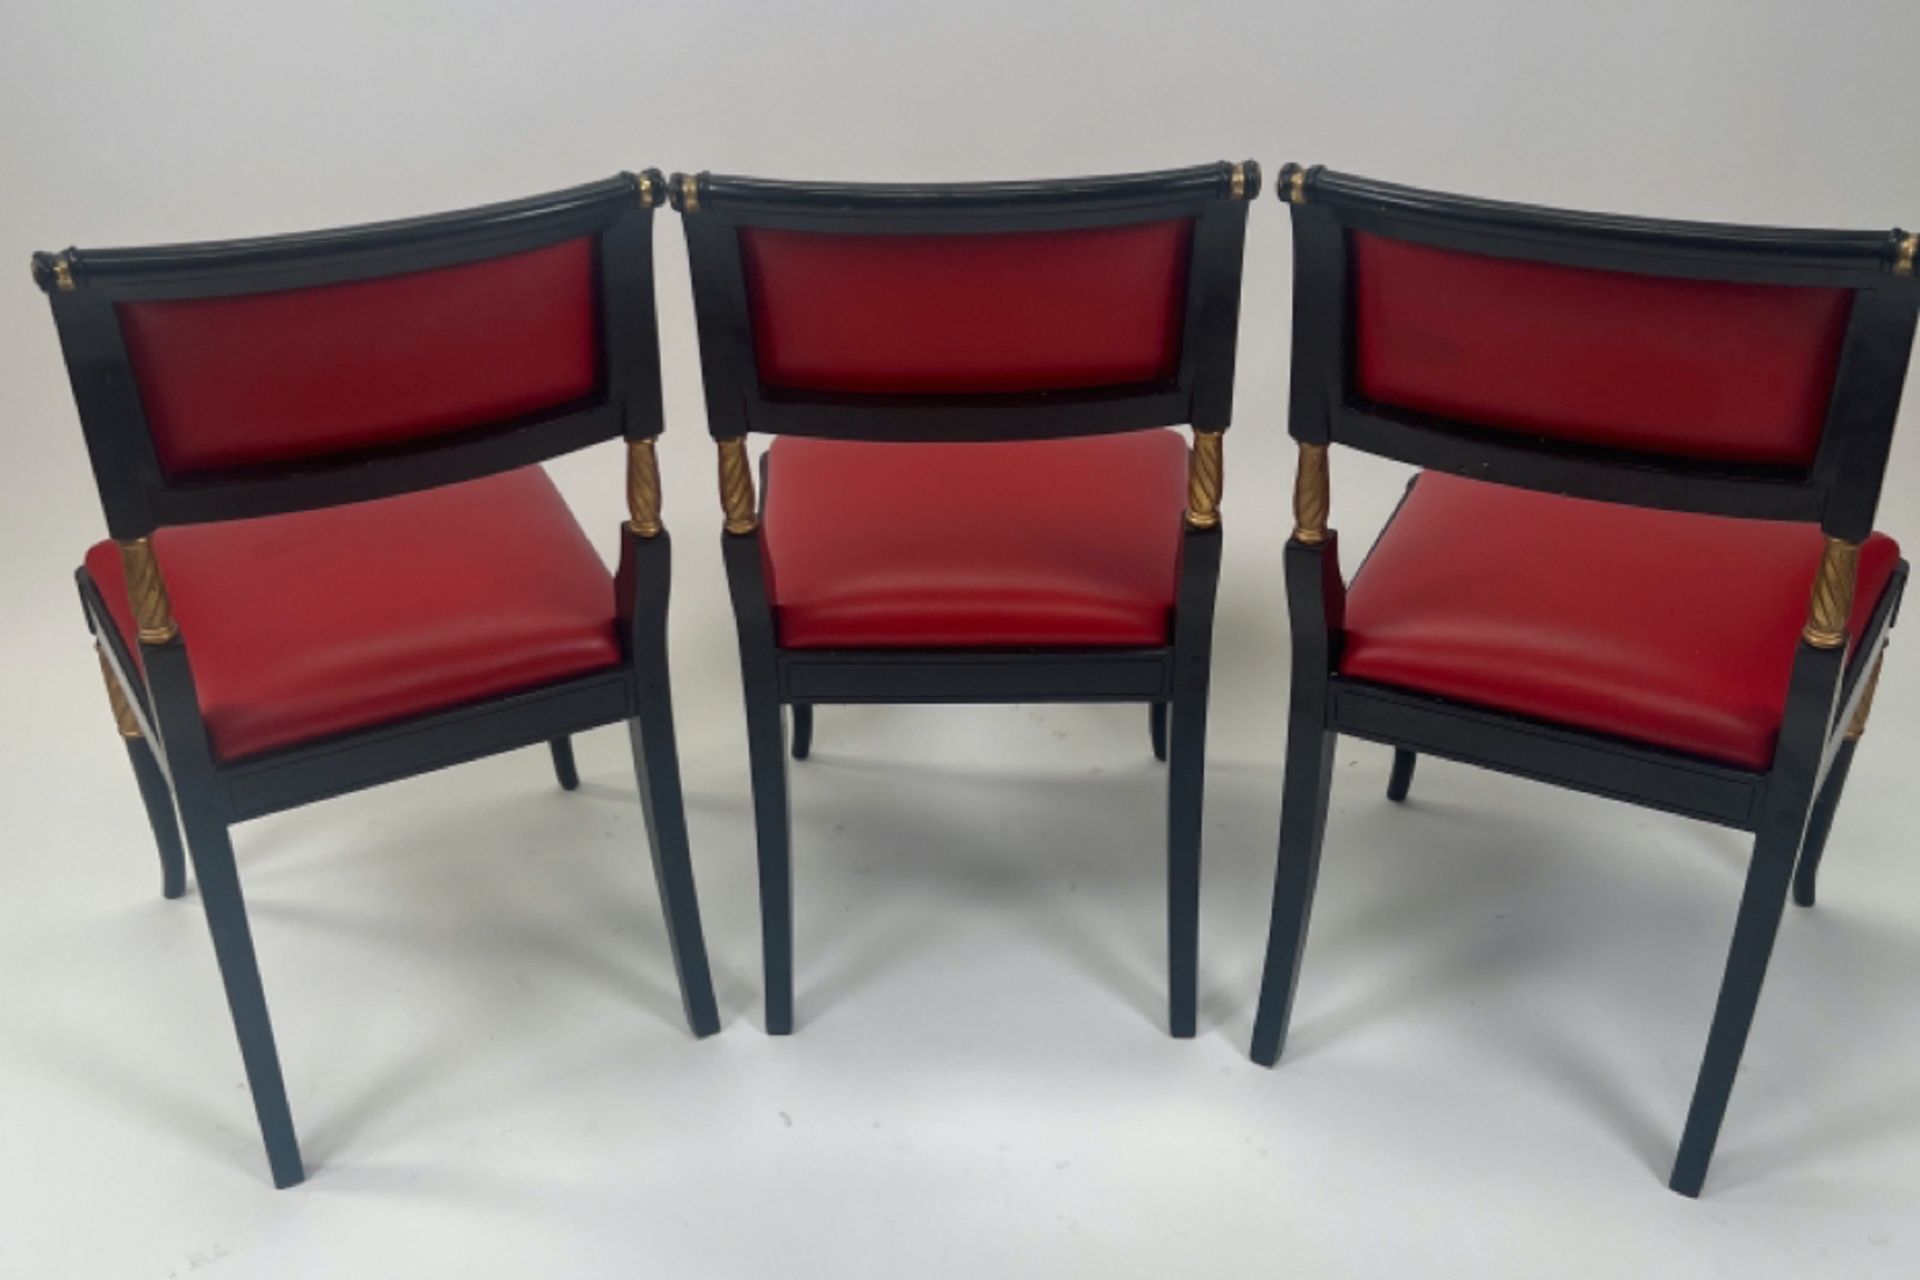 Trio of regency ebonised gilt dining chairs - Image 5 of 8